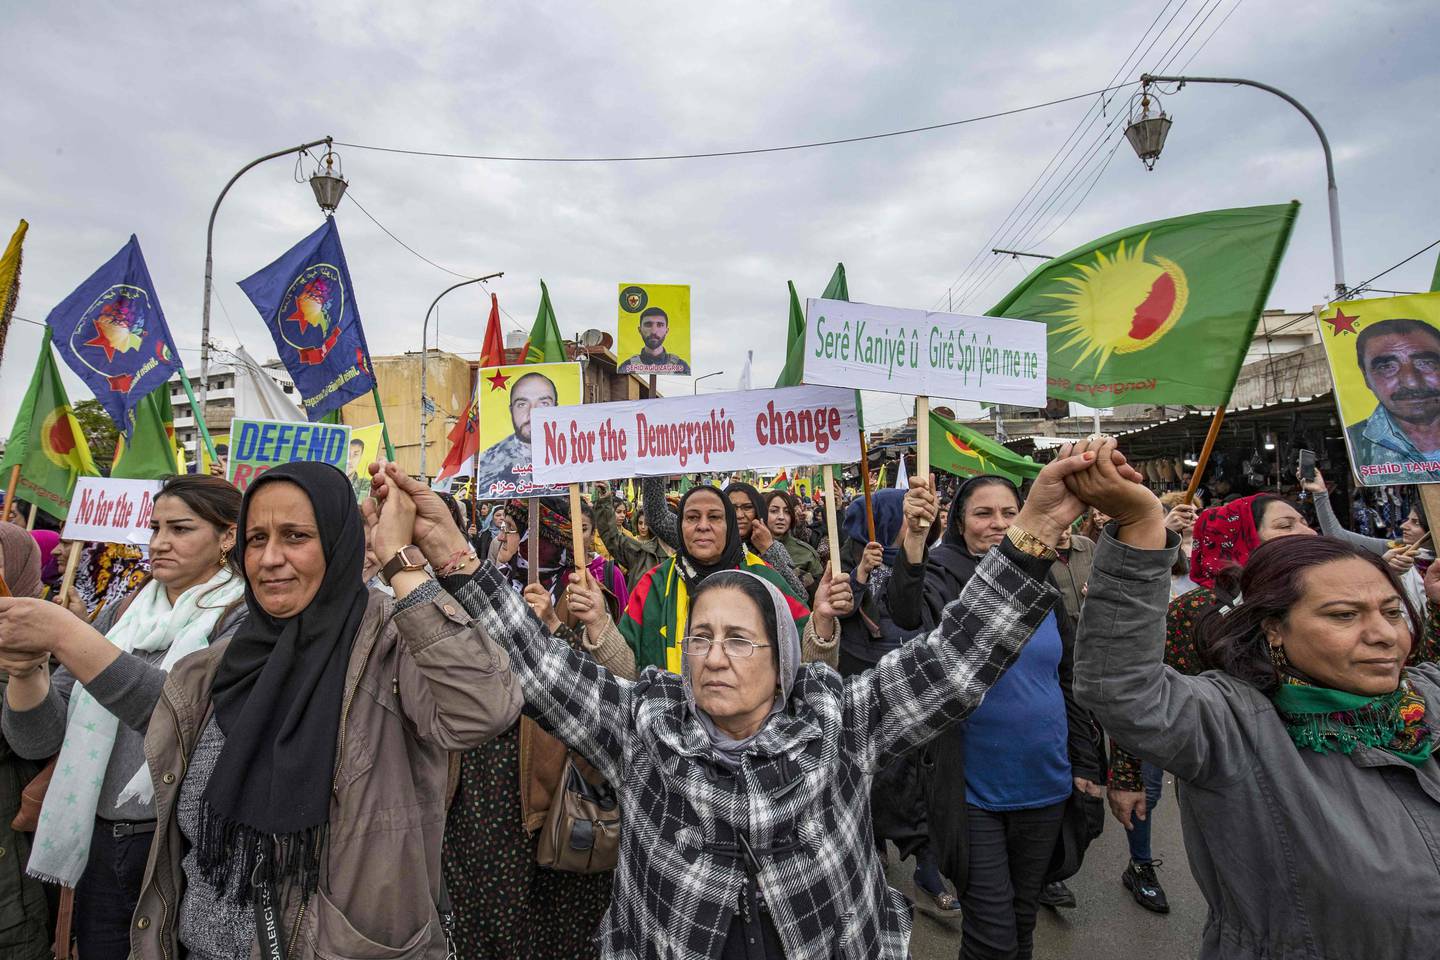 Syrian Kurdish protesters wave signs and chant slogans during a demonstration against Turkish threats in the northeastern city of Qamishli, the de-facto capital of Syria's embattled Kurdish minority, on November 2, 2019. - A complex Russian-Turkish ceasefire deal struck last week has left Qamishli's Kurds uncertain about their future. (Photo by Delil SOULEIMAN / AFP)